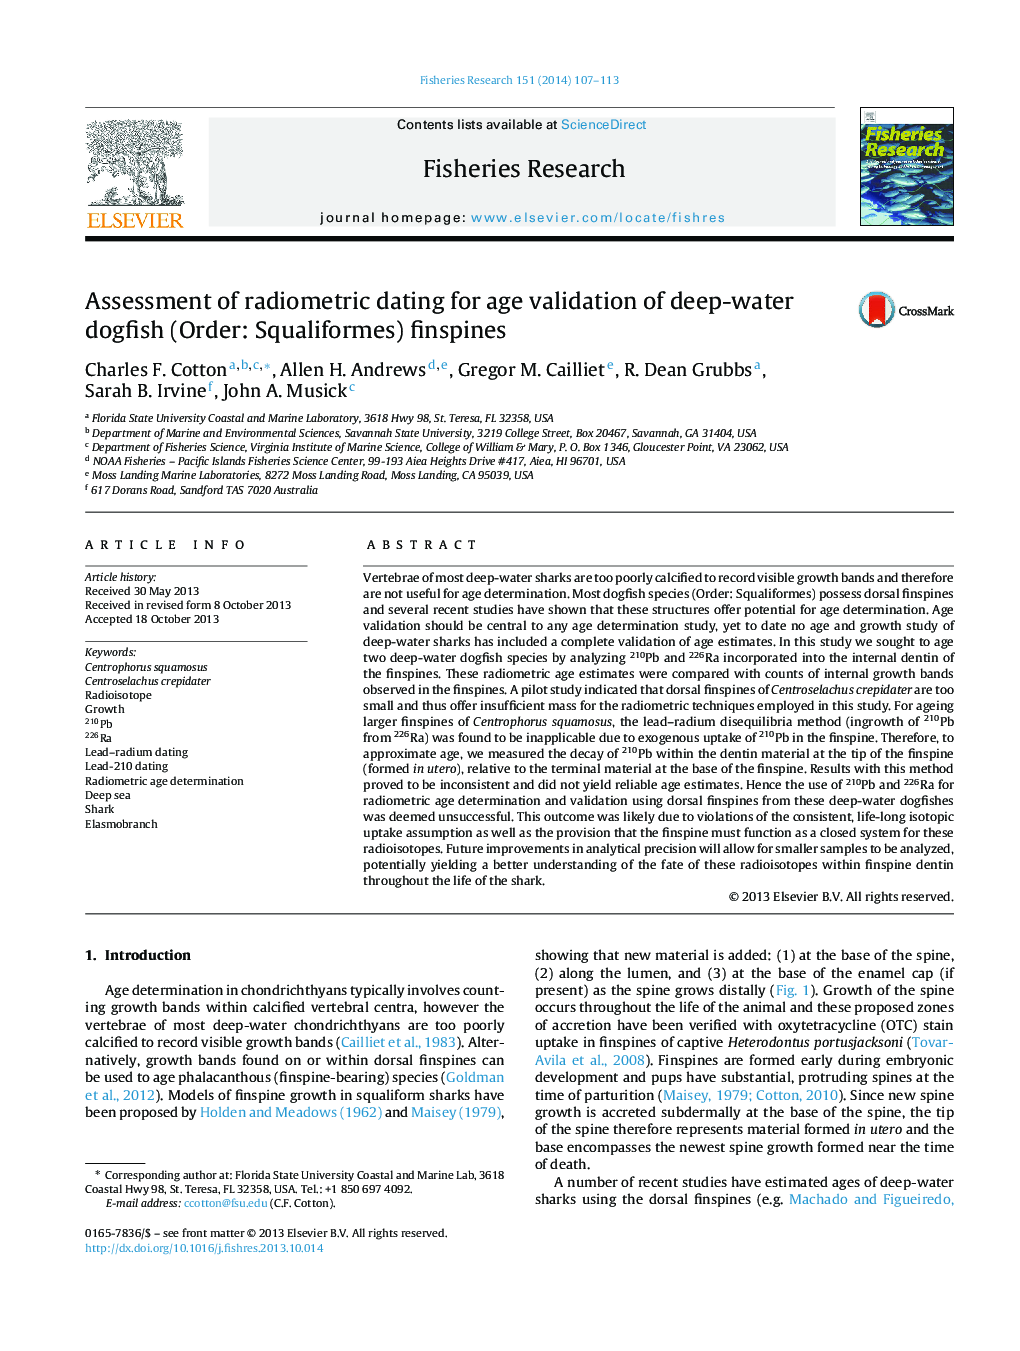 Assessment of radiometric dating for age validation of deep-water dogfish (Order: Squaliformes) finspines